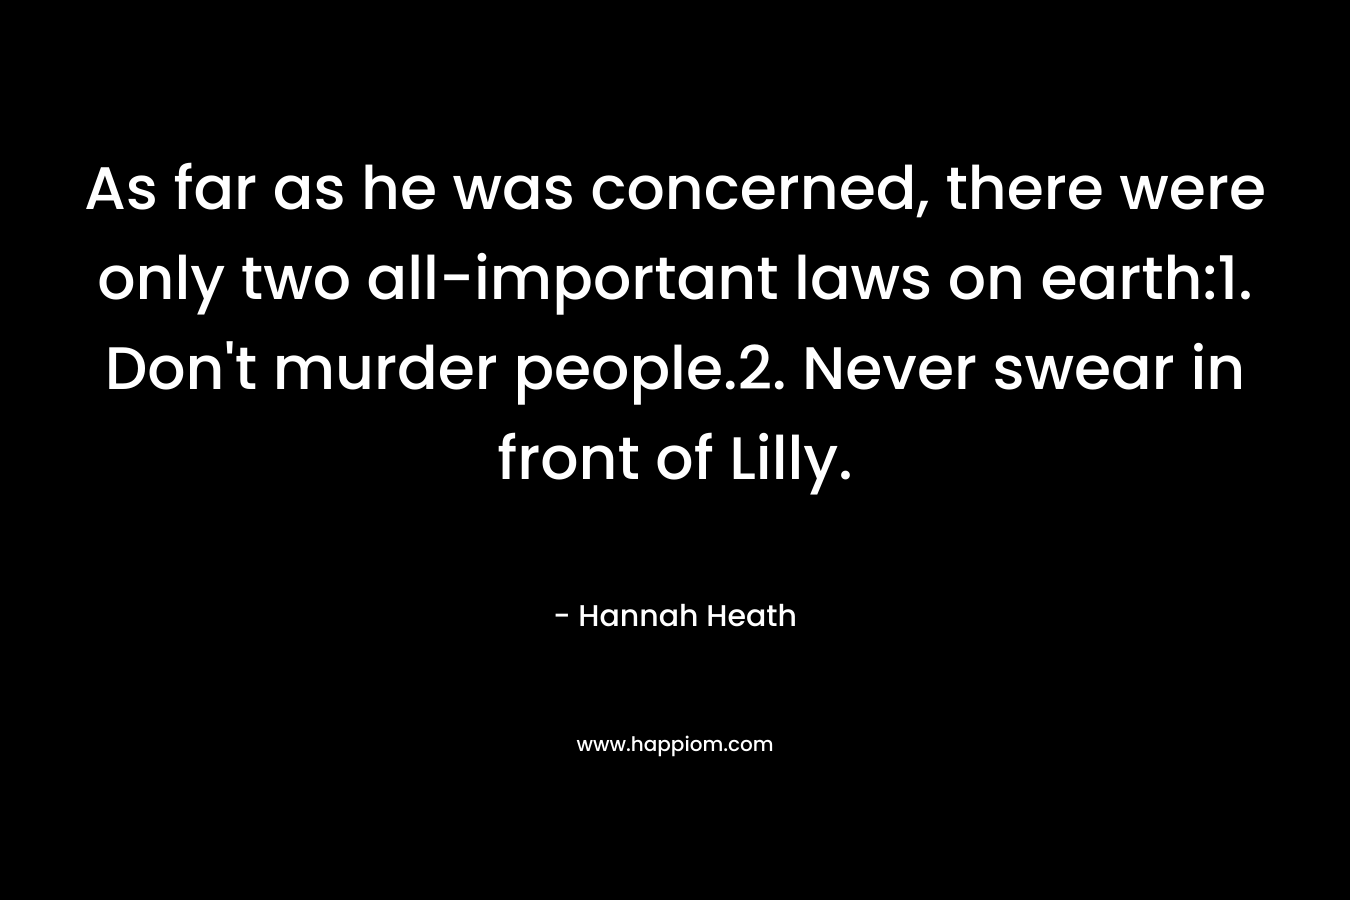 As far as he was concerned, there were only two all-important laws on earth:1. Don't murder people.2. Never swear in front of Lilly.